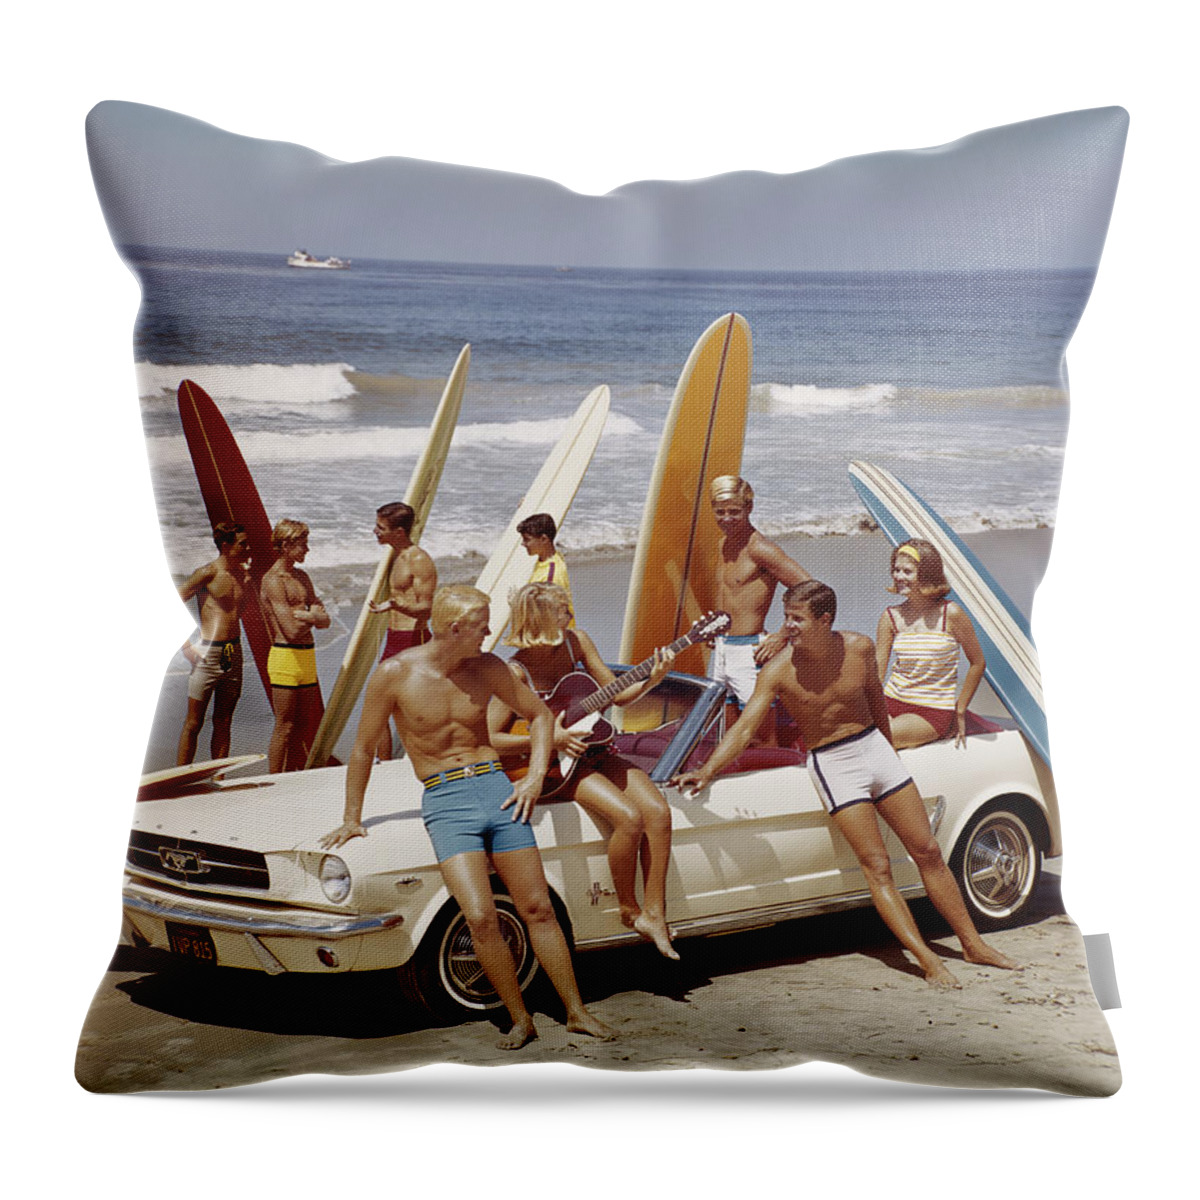 #faatoppicks Throw Pillow featuring the photograph Friends Having Fun On Beach by Tom Kelley Archive